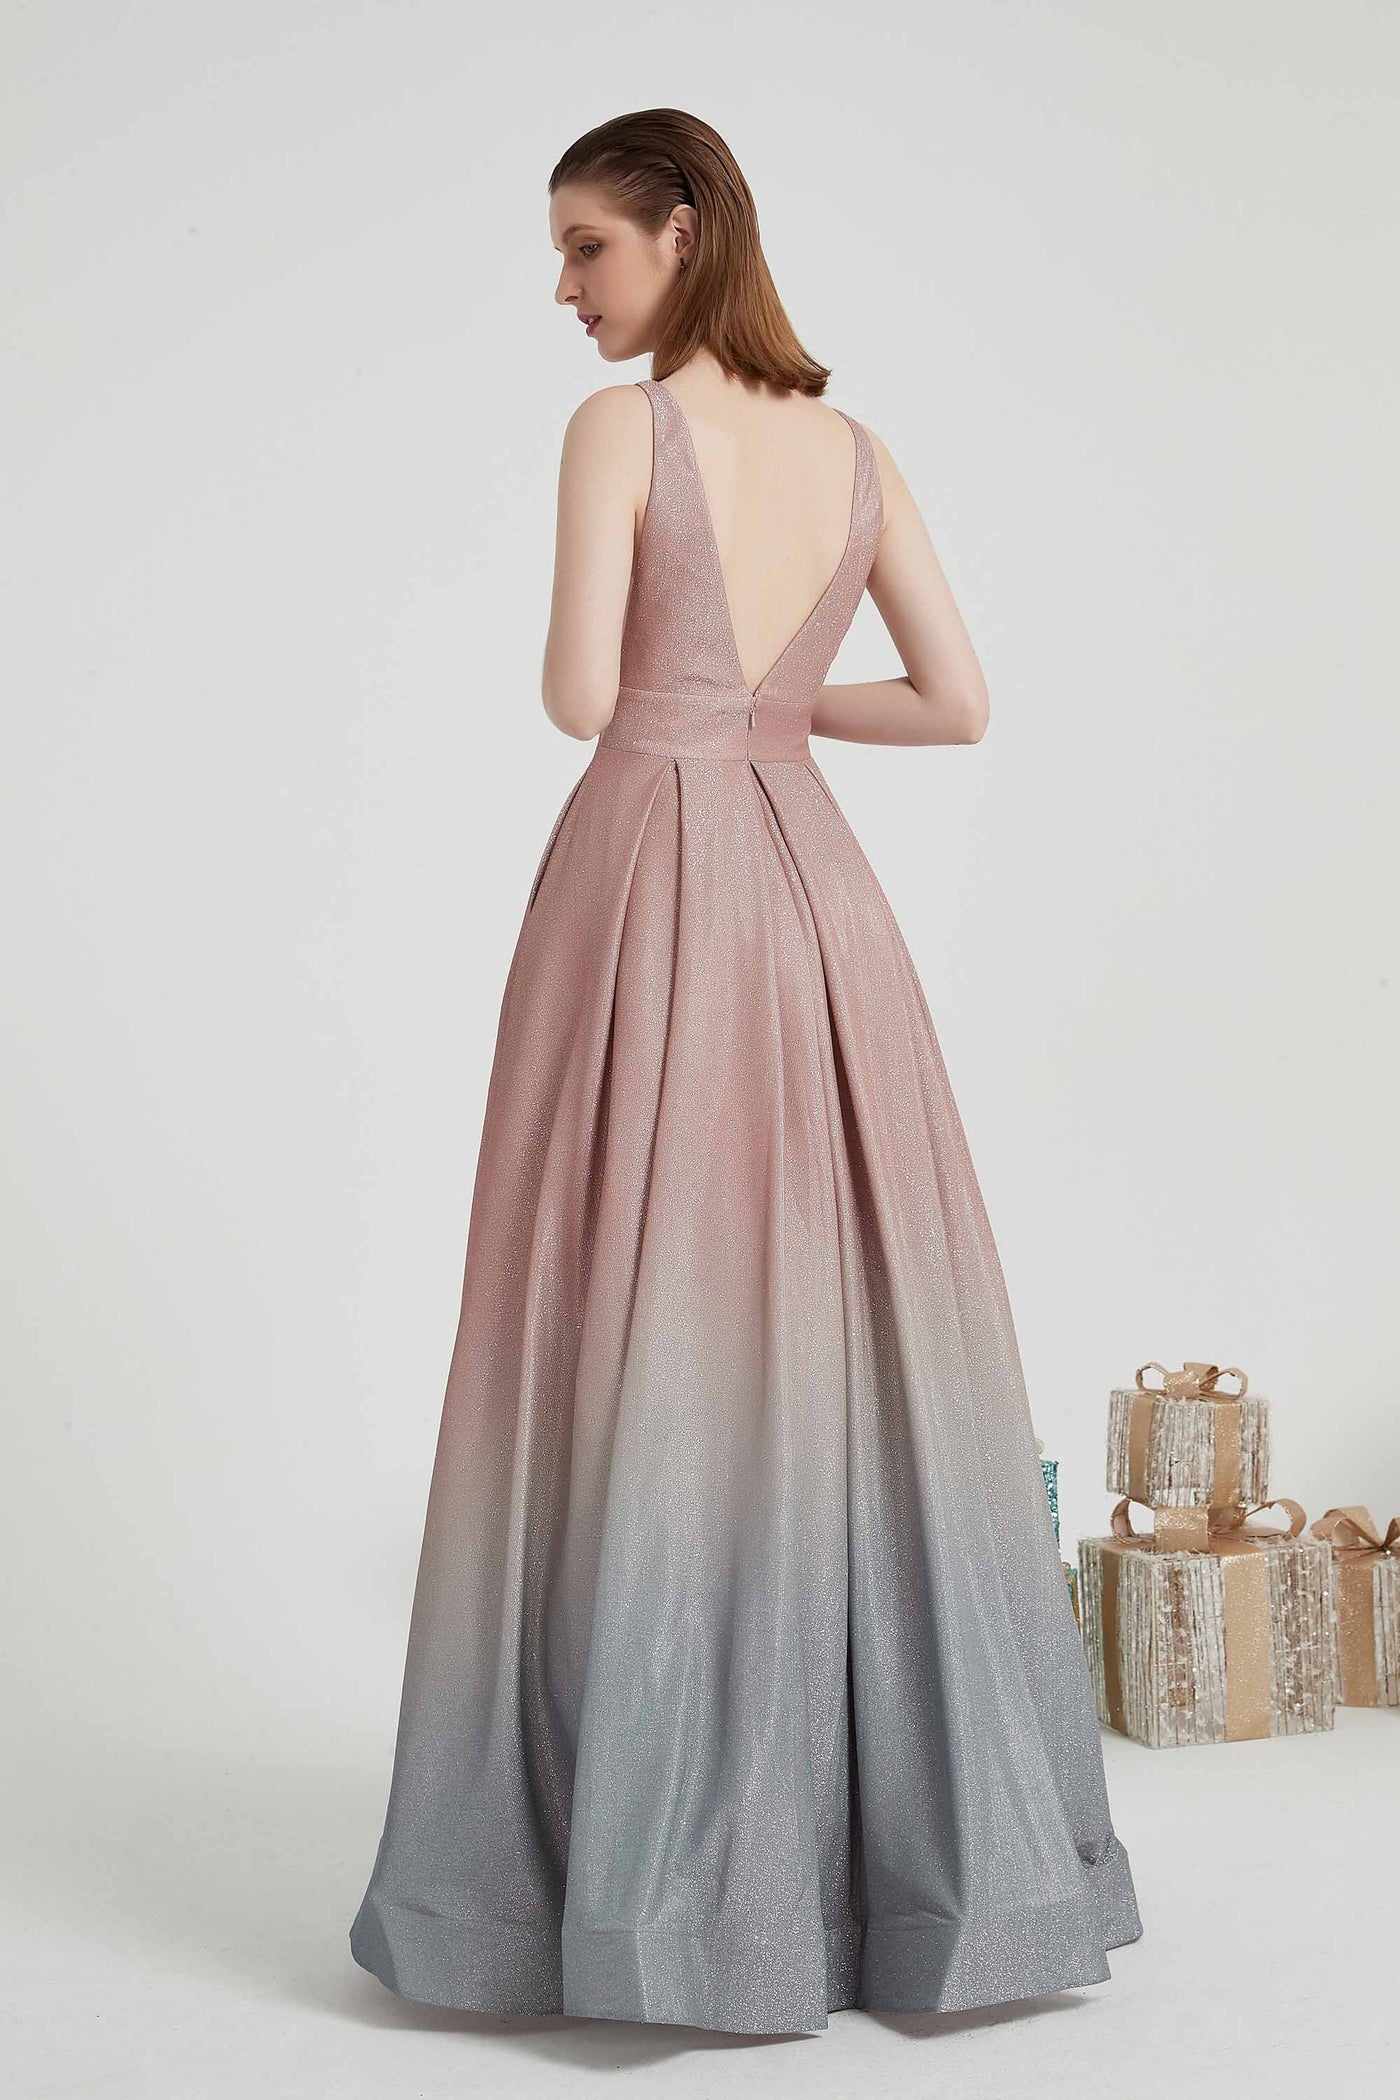 Straps V-Cut Gradient Pleated BodiceParty Prom Gown